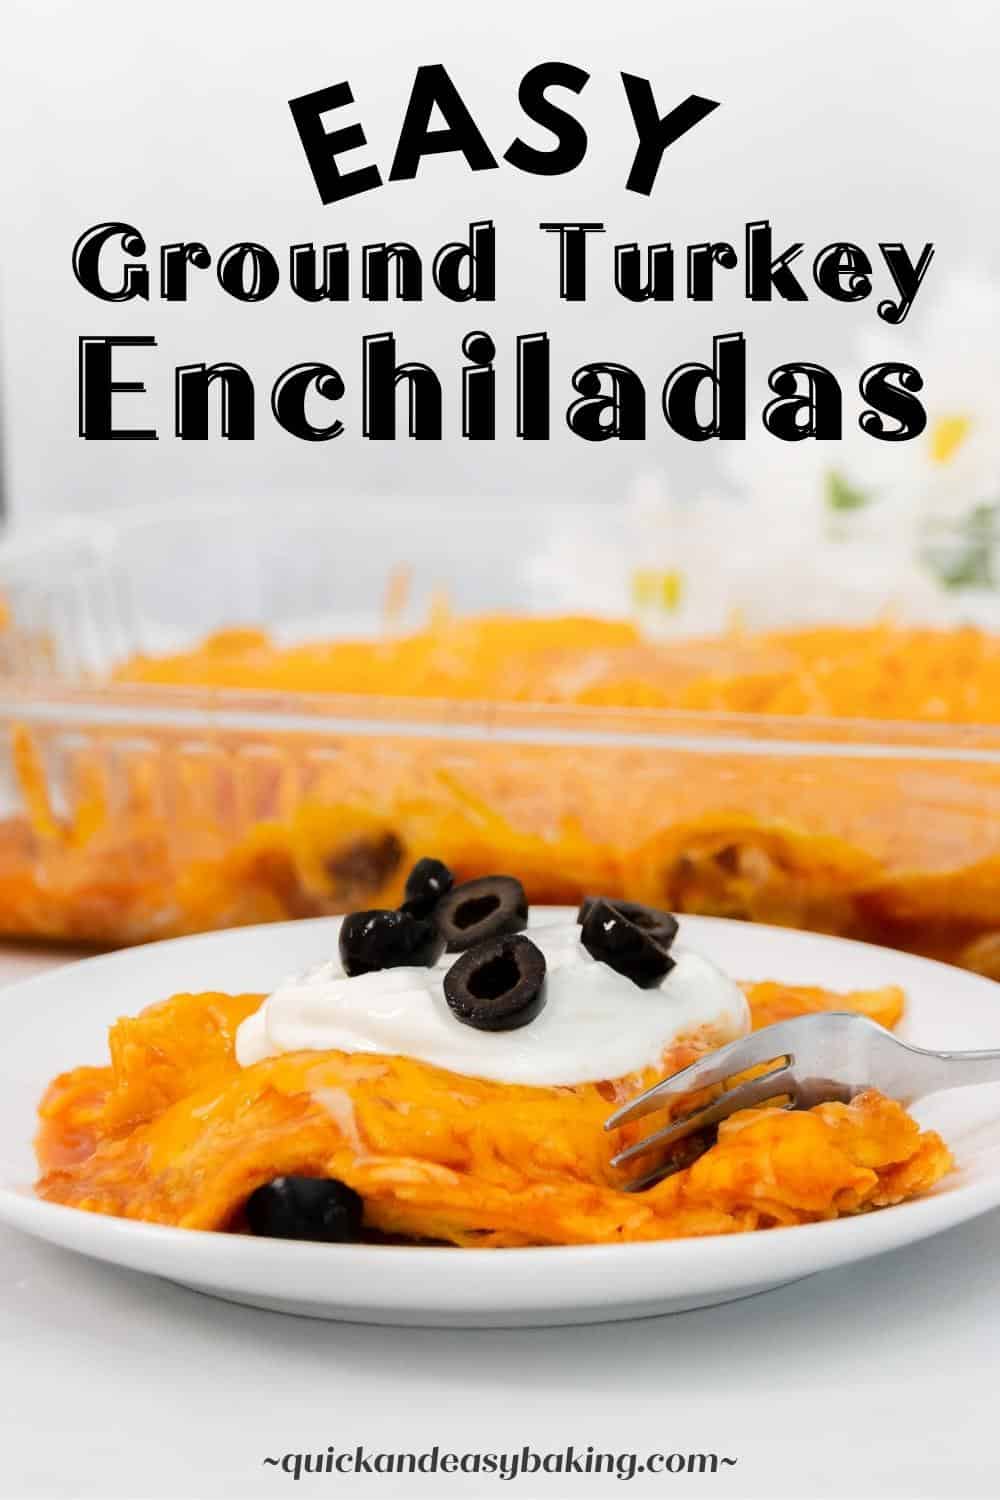 Close up of enchildadas on a plate with a fork and text that says easy ground turkey enchiladas.